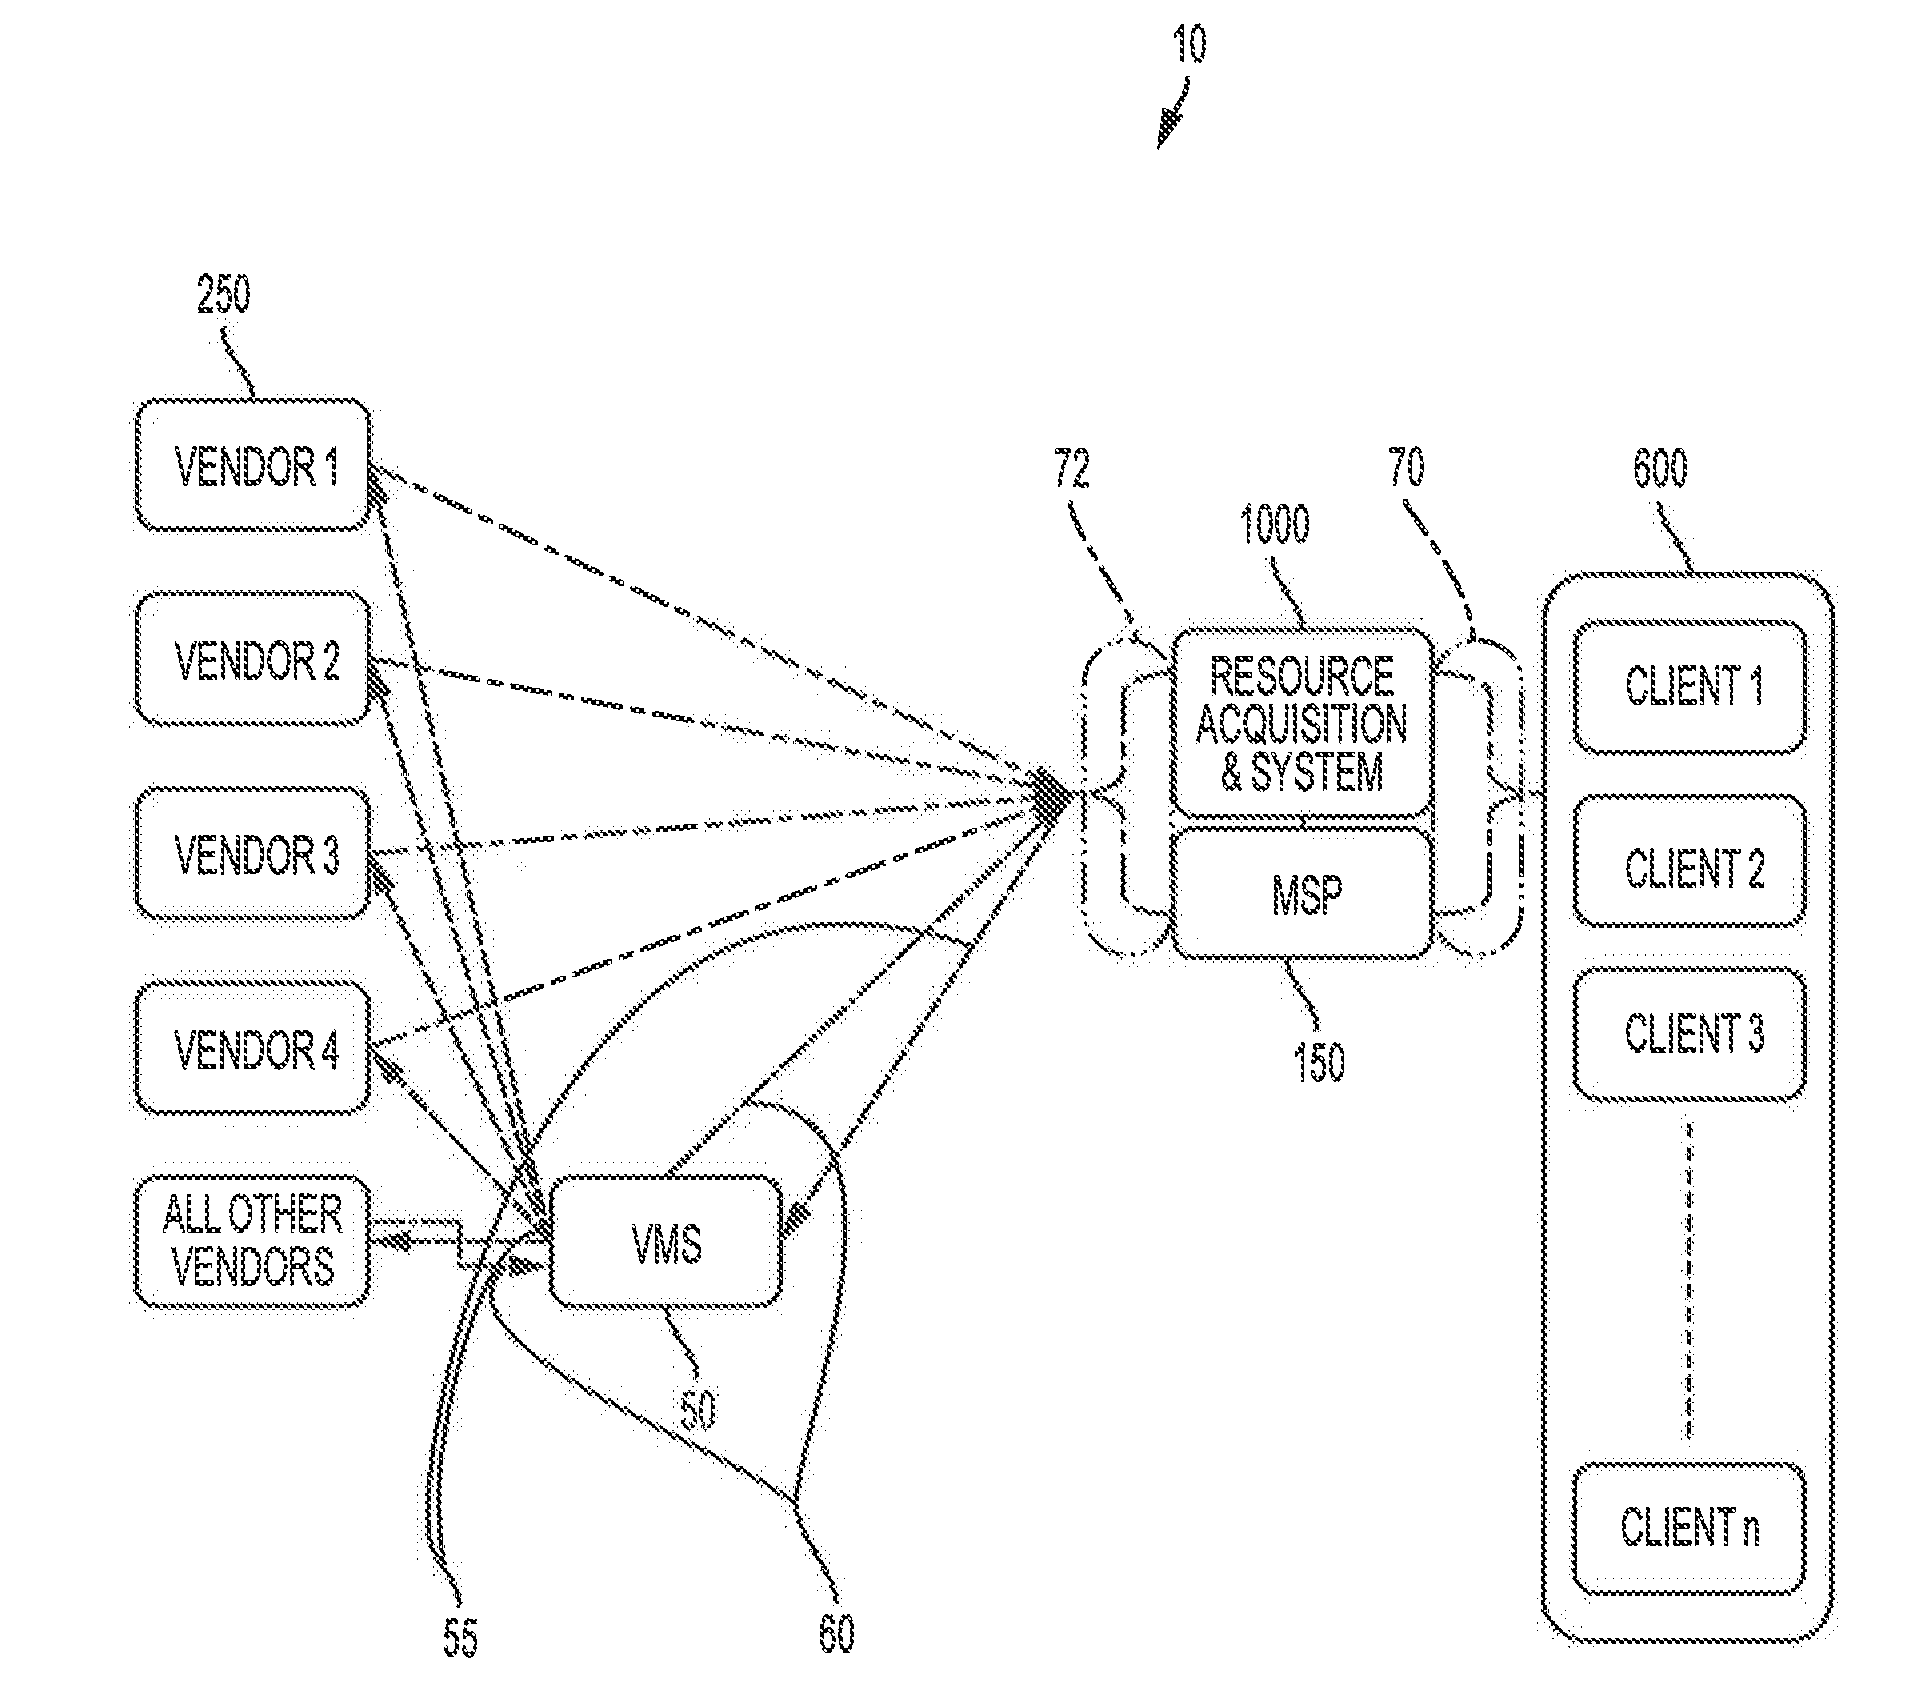 Talent acquisition and management system and method